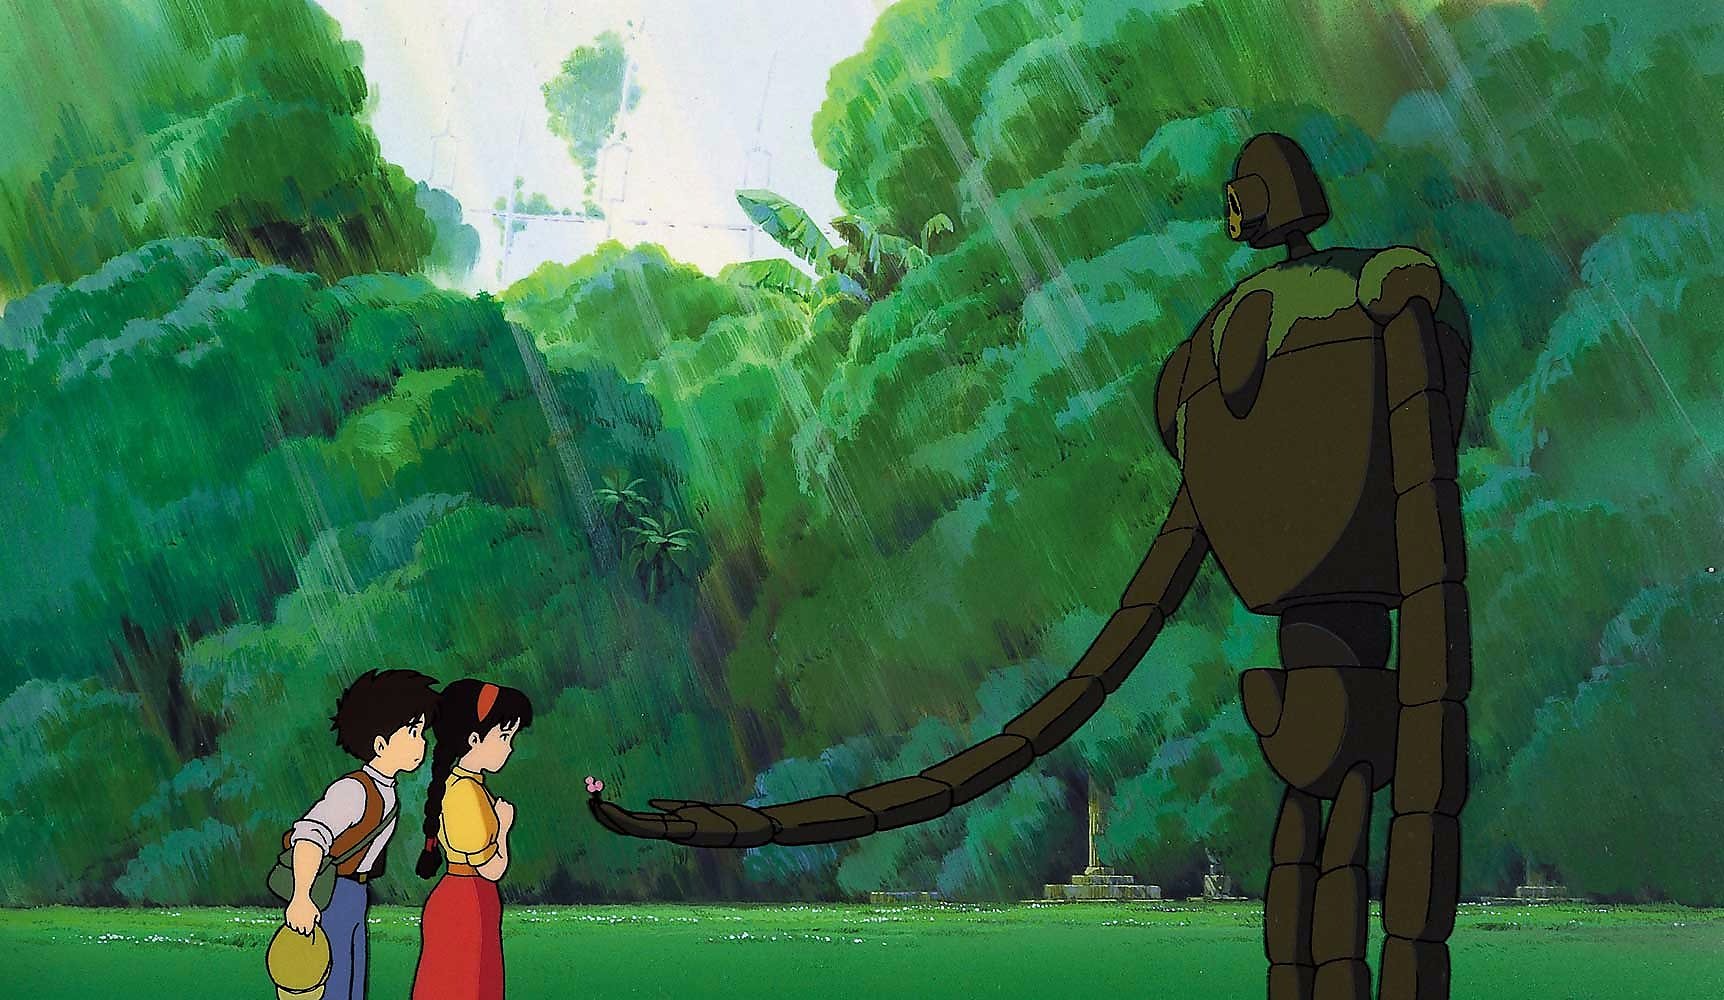 Studio Ghibli classic 'Castle in the Sky' returns to theaters